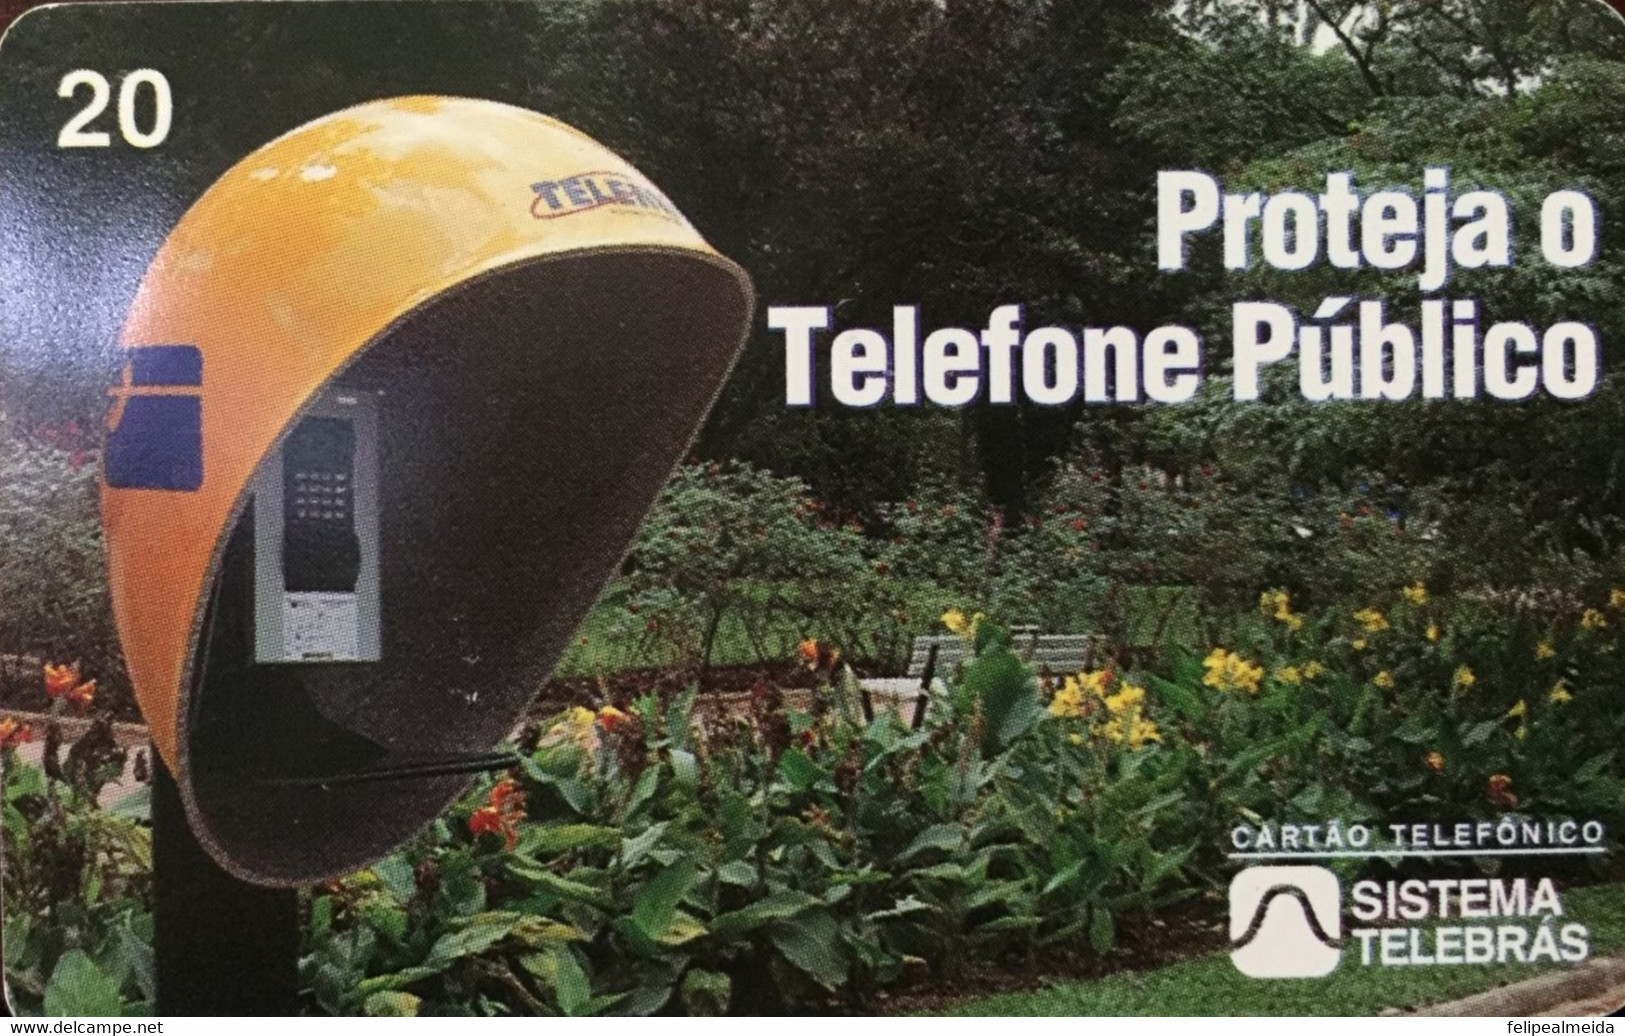 Phone Card Manufactured By Telebras In 1998 - Advertising Campaign For The Conservation Of Public Telephones - Operadores De Telecom